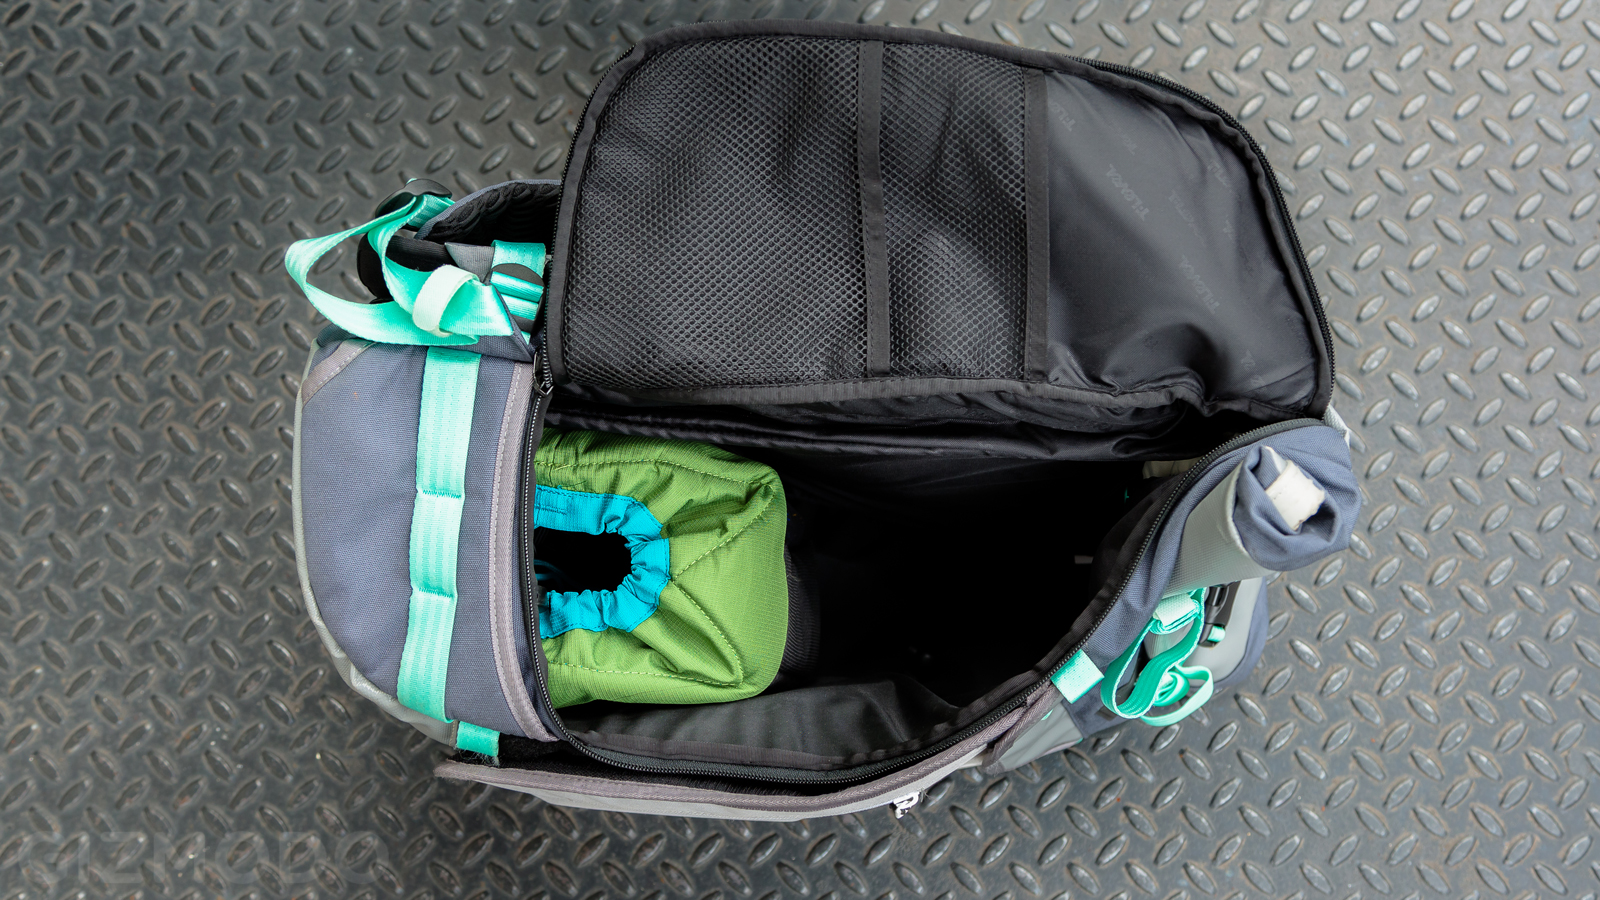 The Best Camera Bag Is One You Put Together Yourself